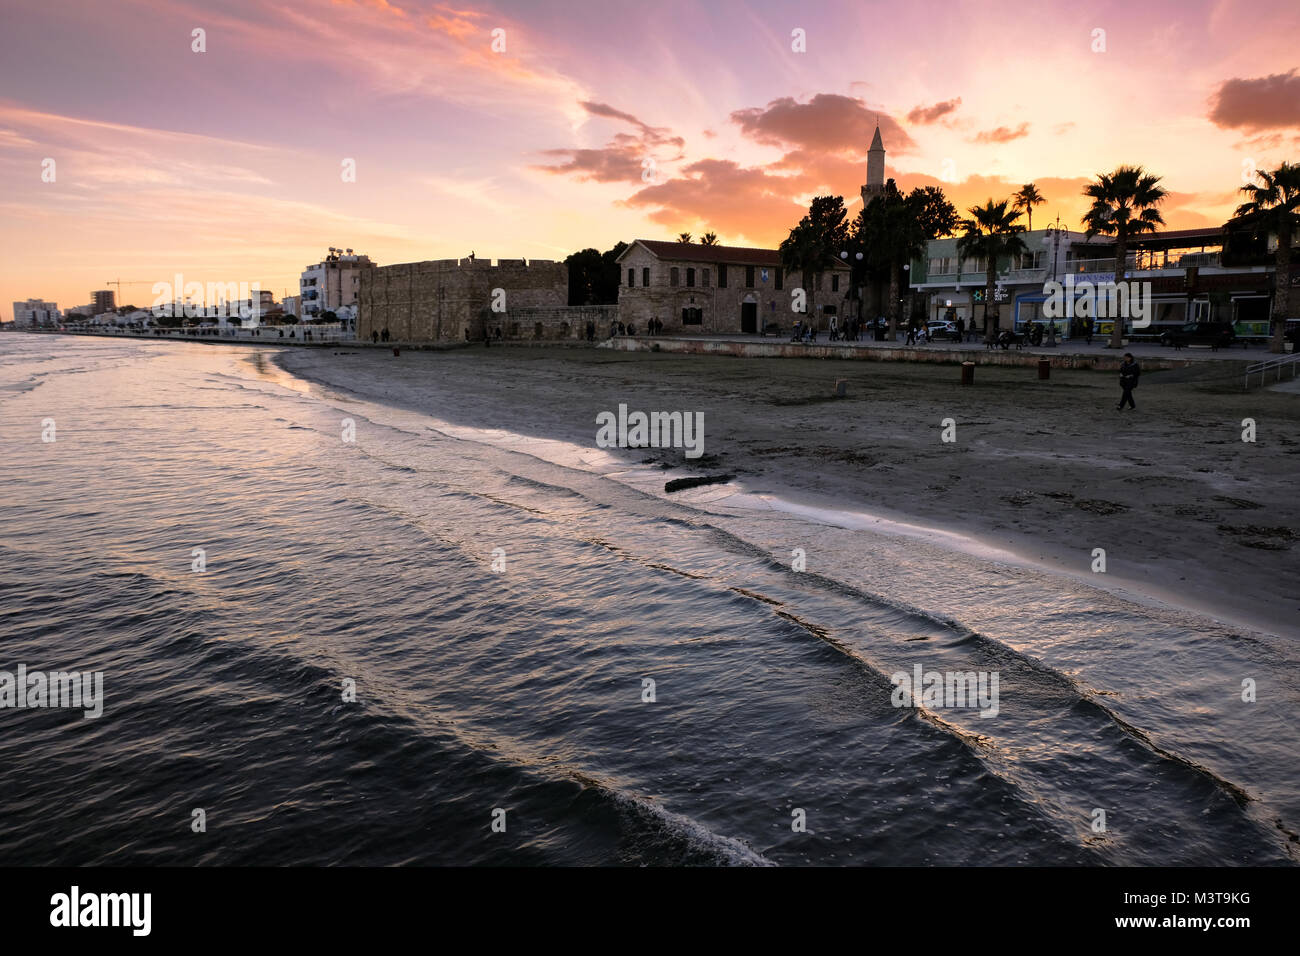 Larnaca, CYPRUS - January 2 2018: People by the waterfront in the city center of Larnaca in sunset light. View towards Larnaca castle and Kebir-Buyuk  Stock Photo